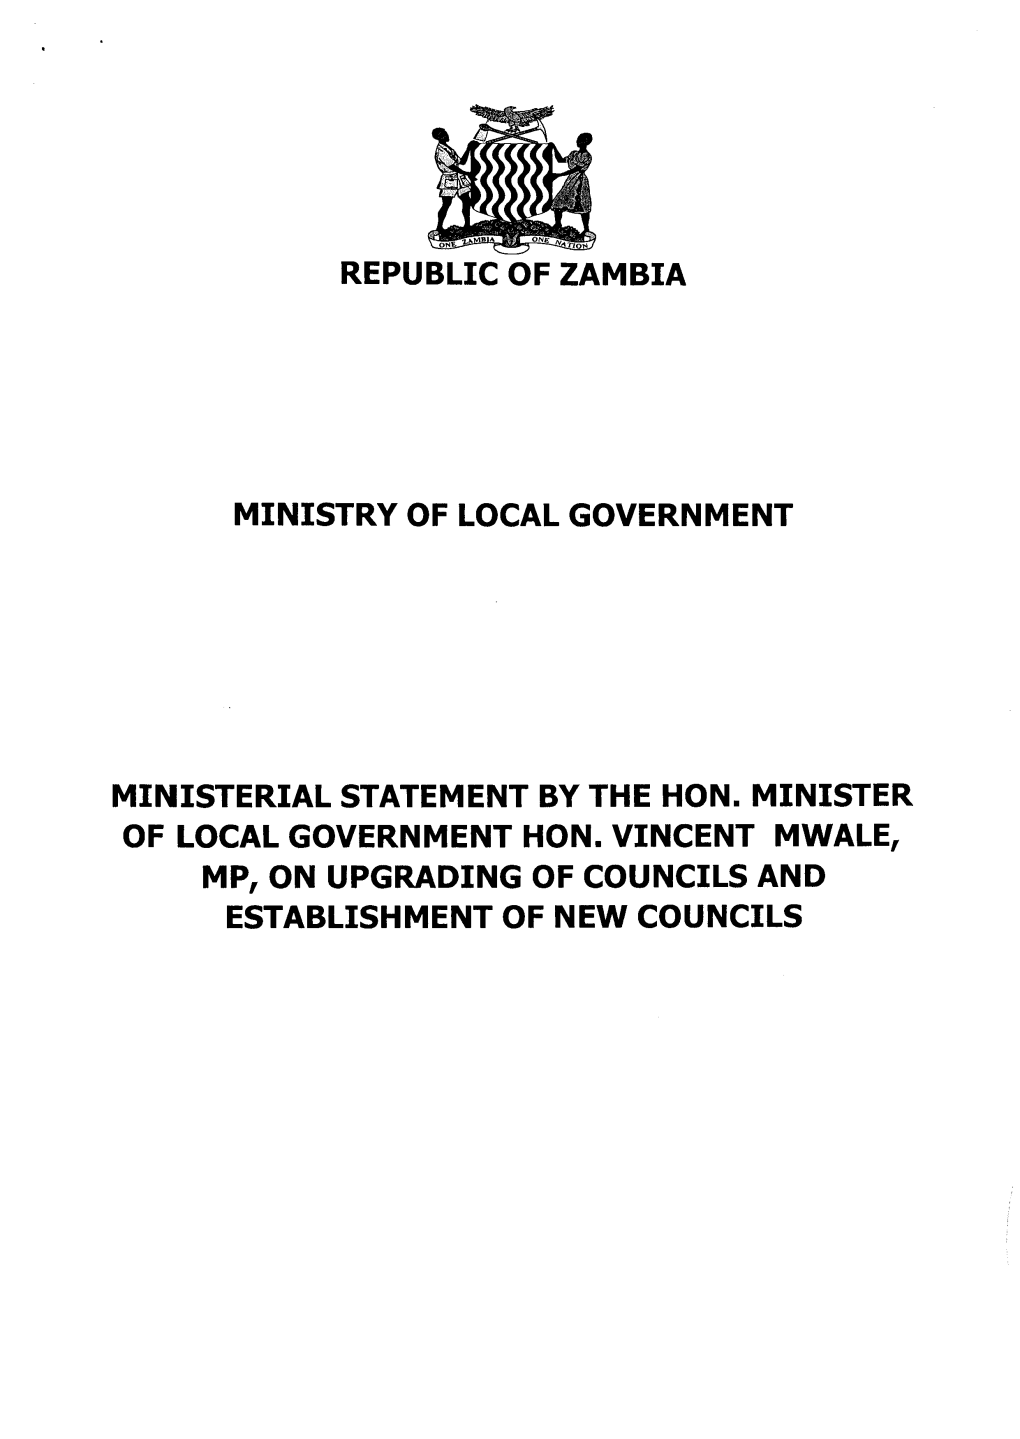 MINISTERIAL STATEMENT by the HON. MINISTER of LOCAL GOVERNMENT HON